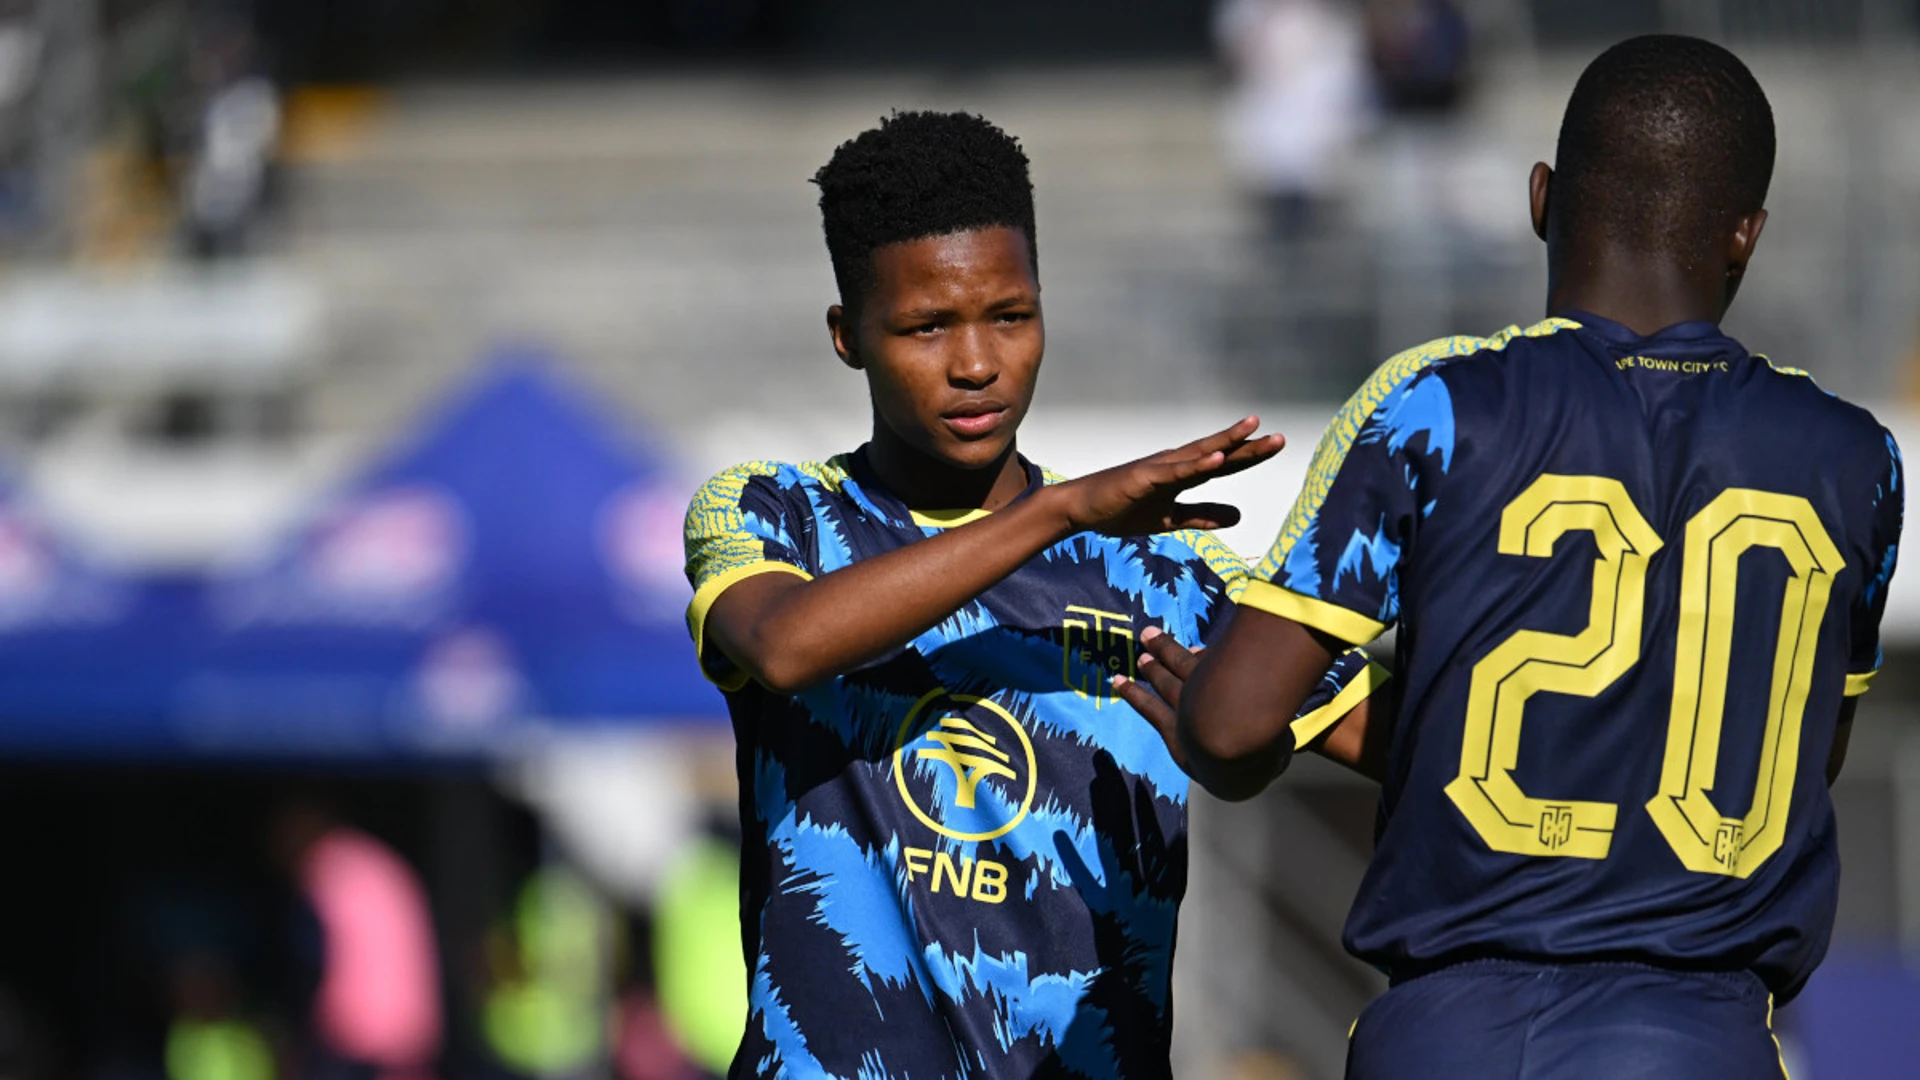 Cape Town City offer training chance to 15-year-old